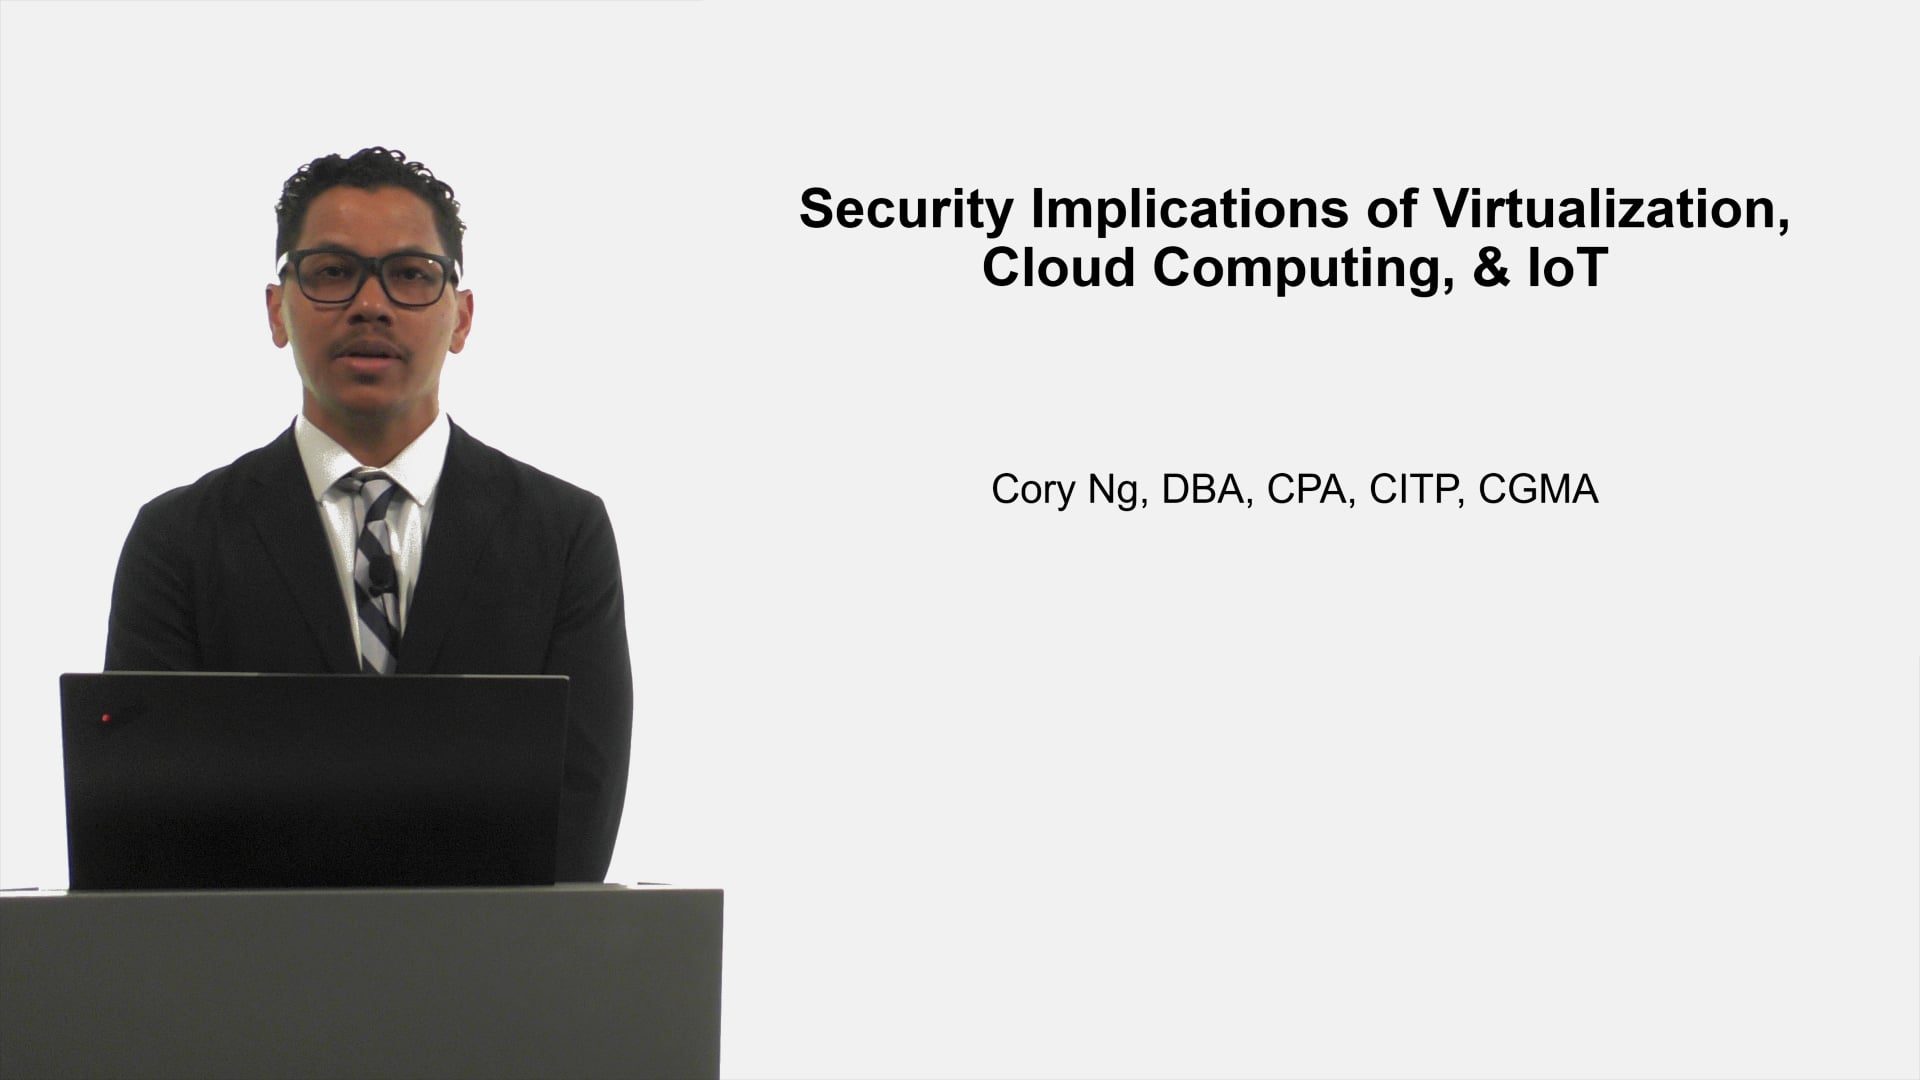 Security Implications of Virtualization, Cloud Computing and IoT